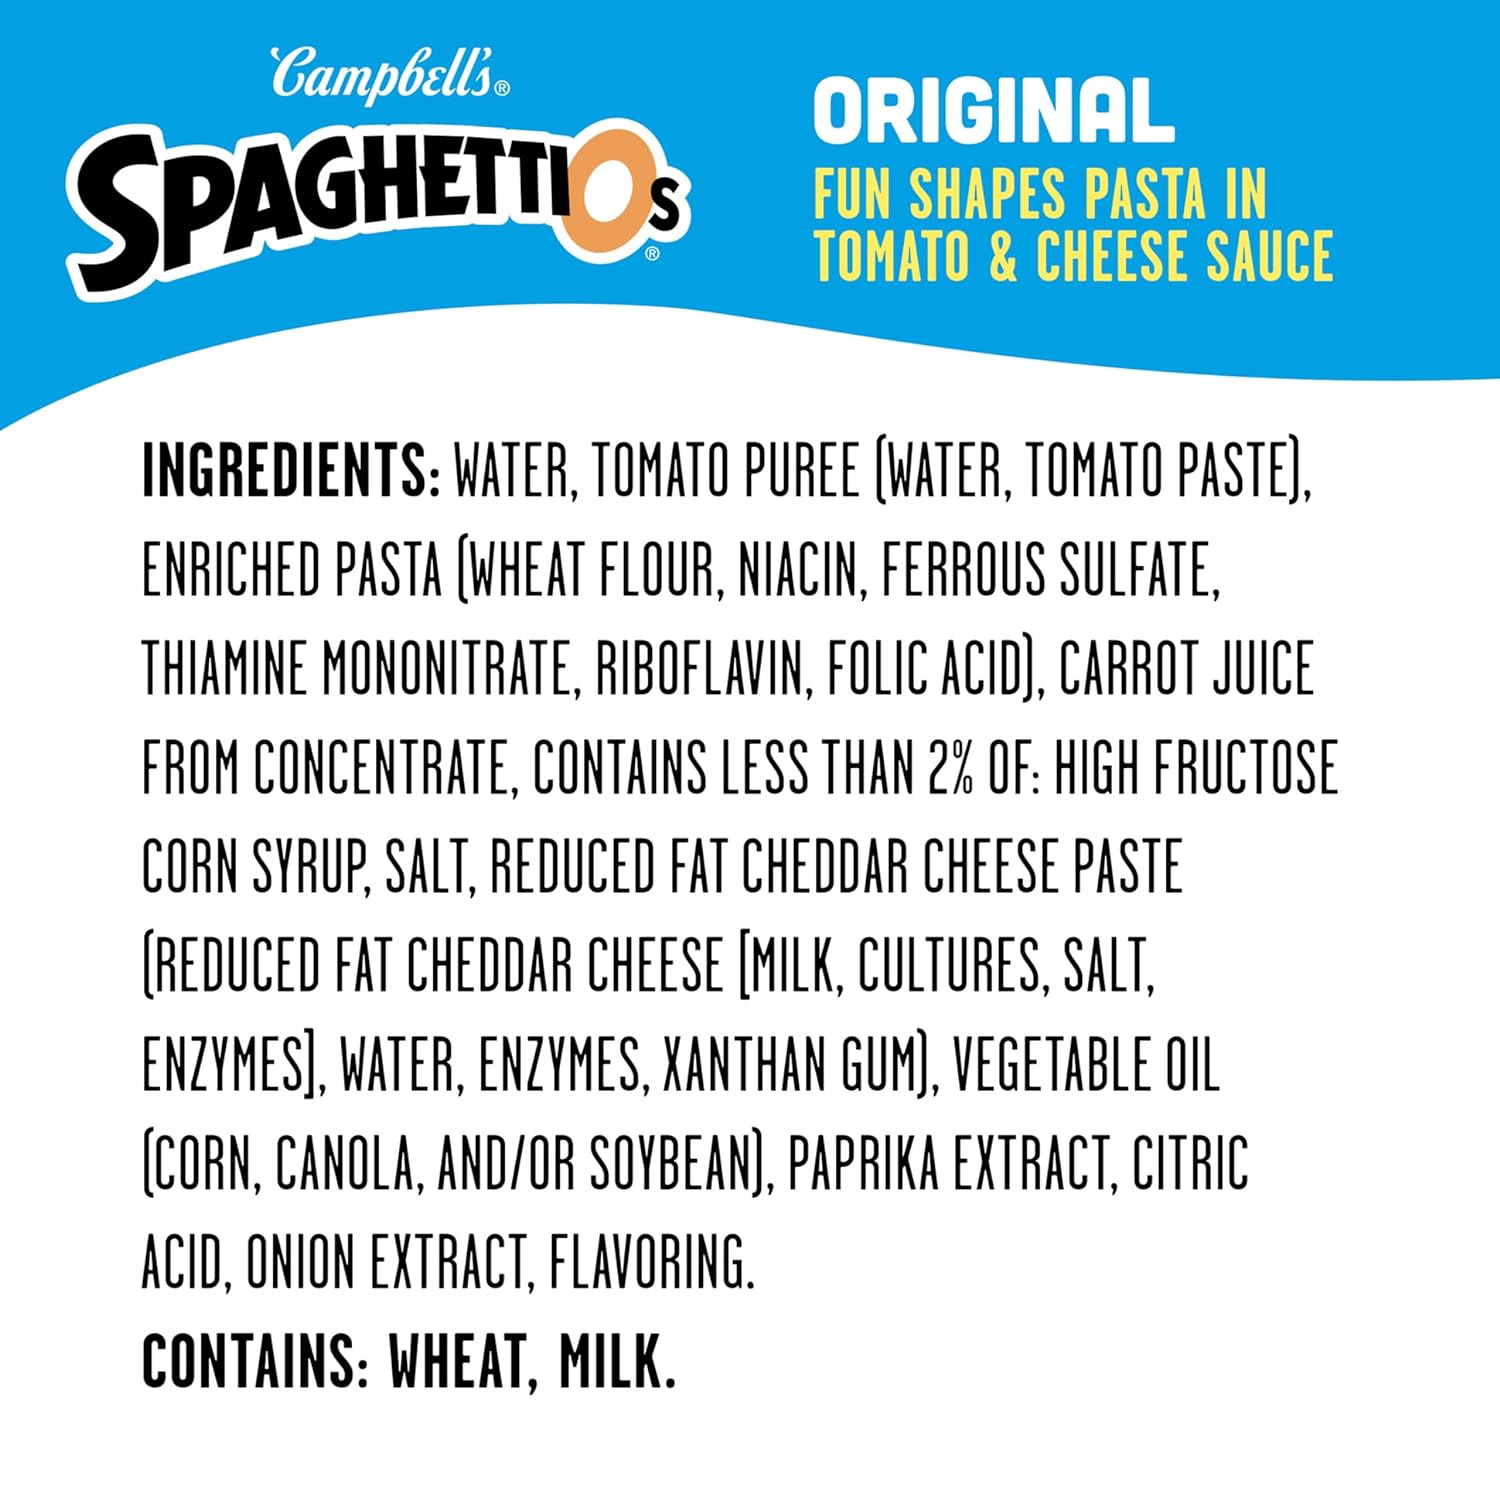 SpaghettiOs Original Star Wars Shaped Canned Pasta, 15.8 oz Can (Pack of 12) : Grocery & Gourmet Food